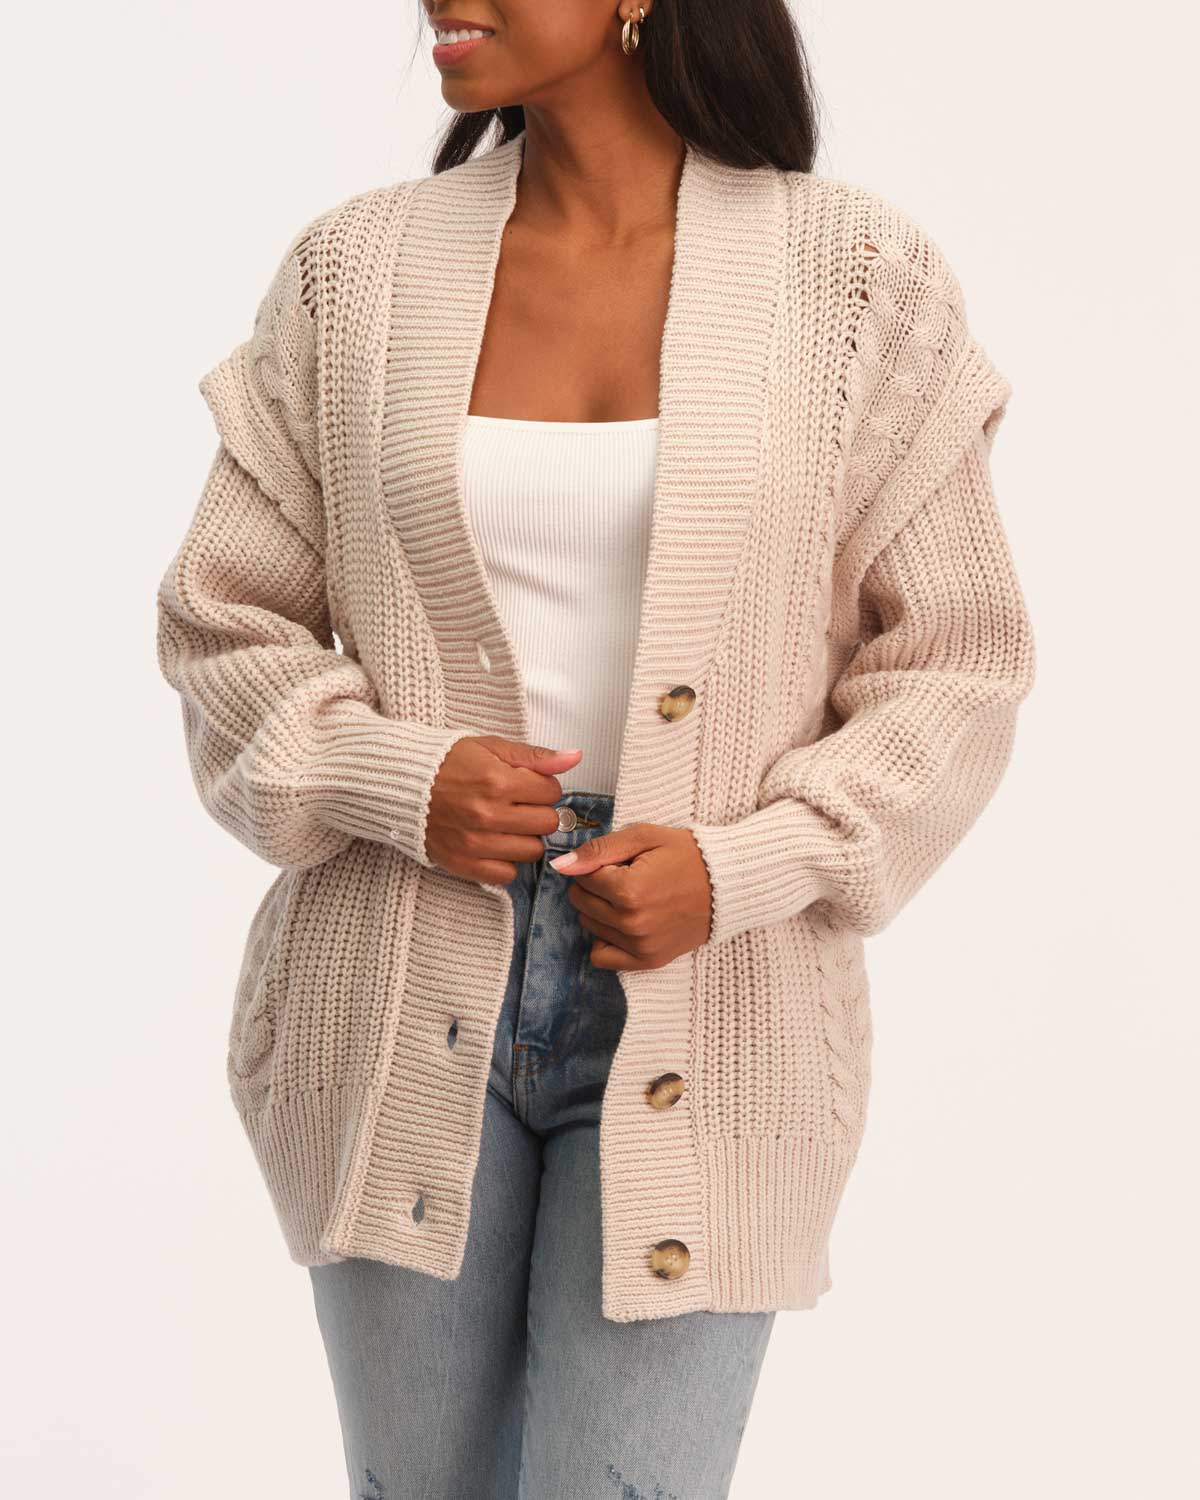 Shop For The Republic Women's V-Neck Cable Knit Cardigan | JANE + MERCER